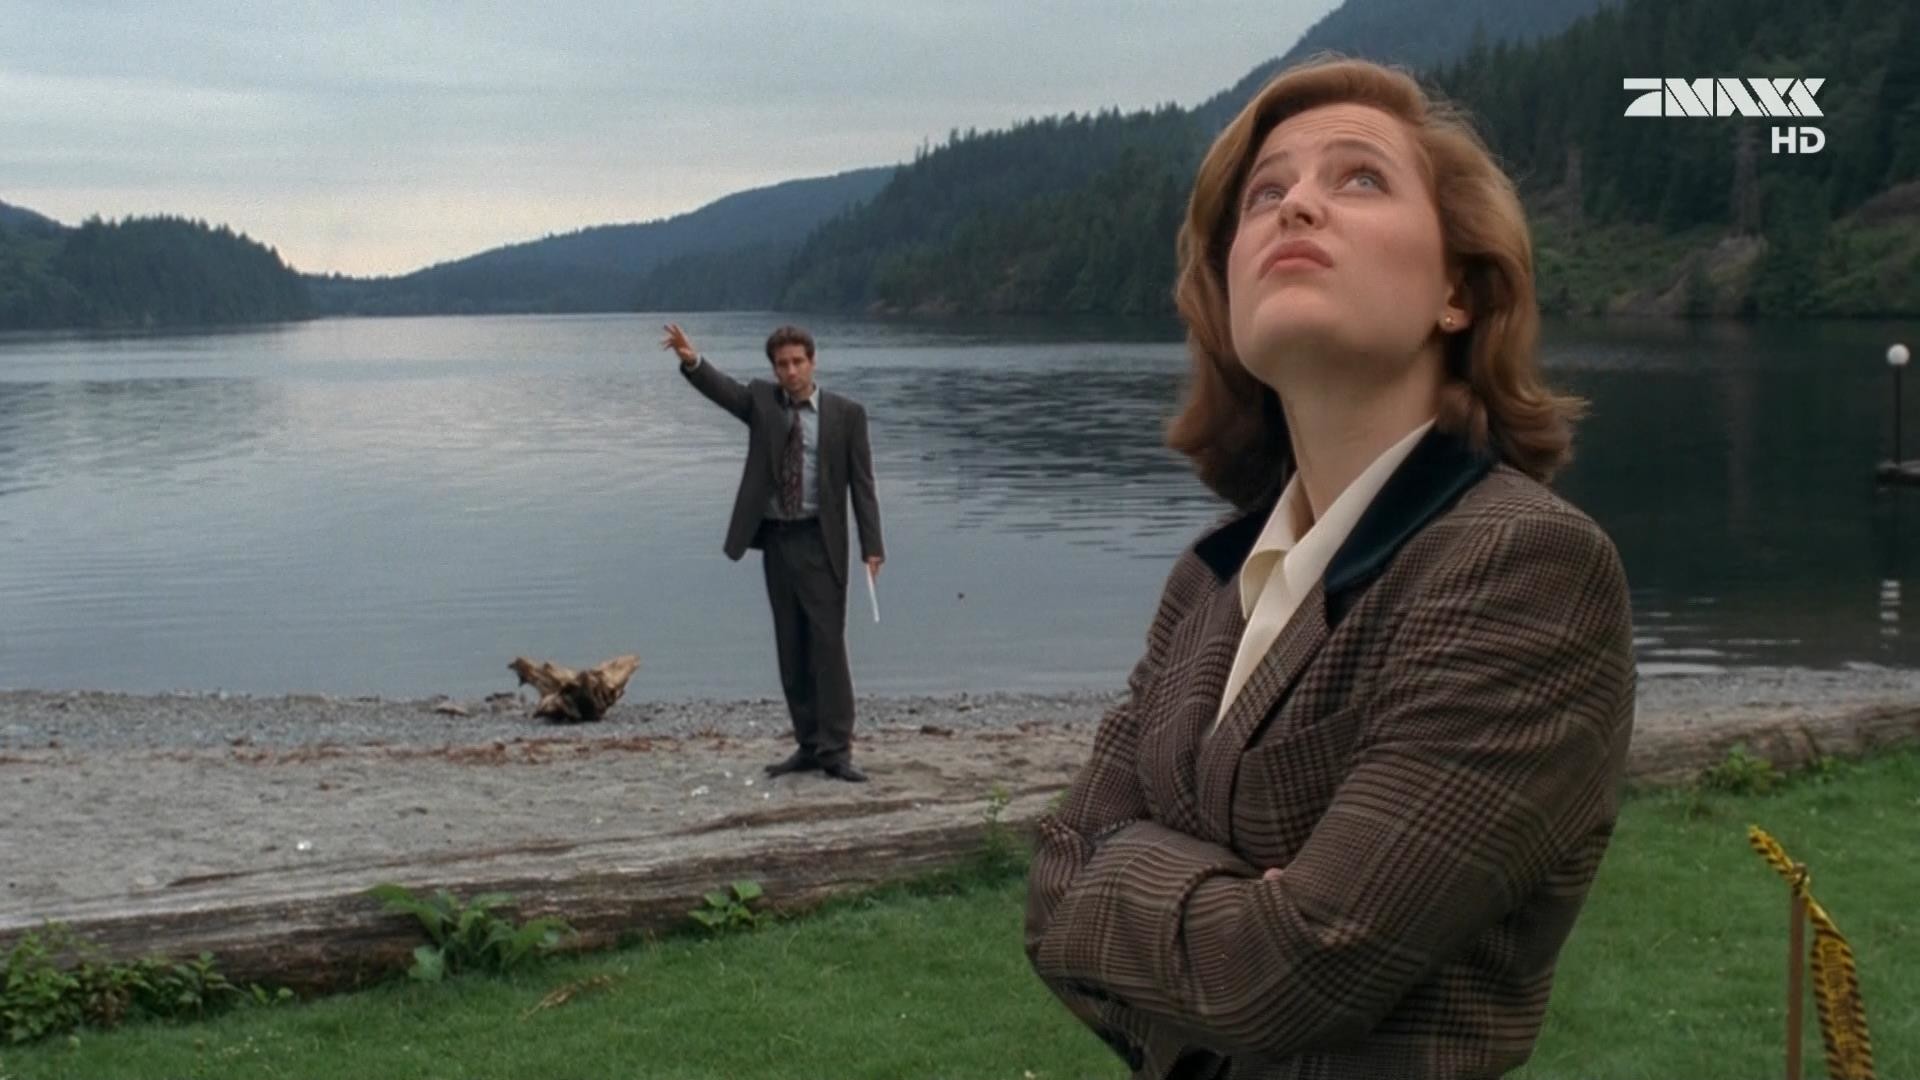 1920x1080 The X Files HD Wallpapers for desktop download